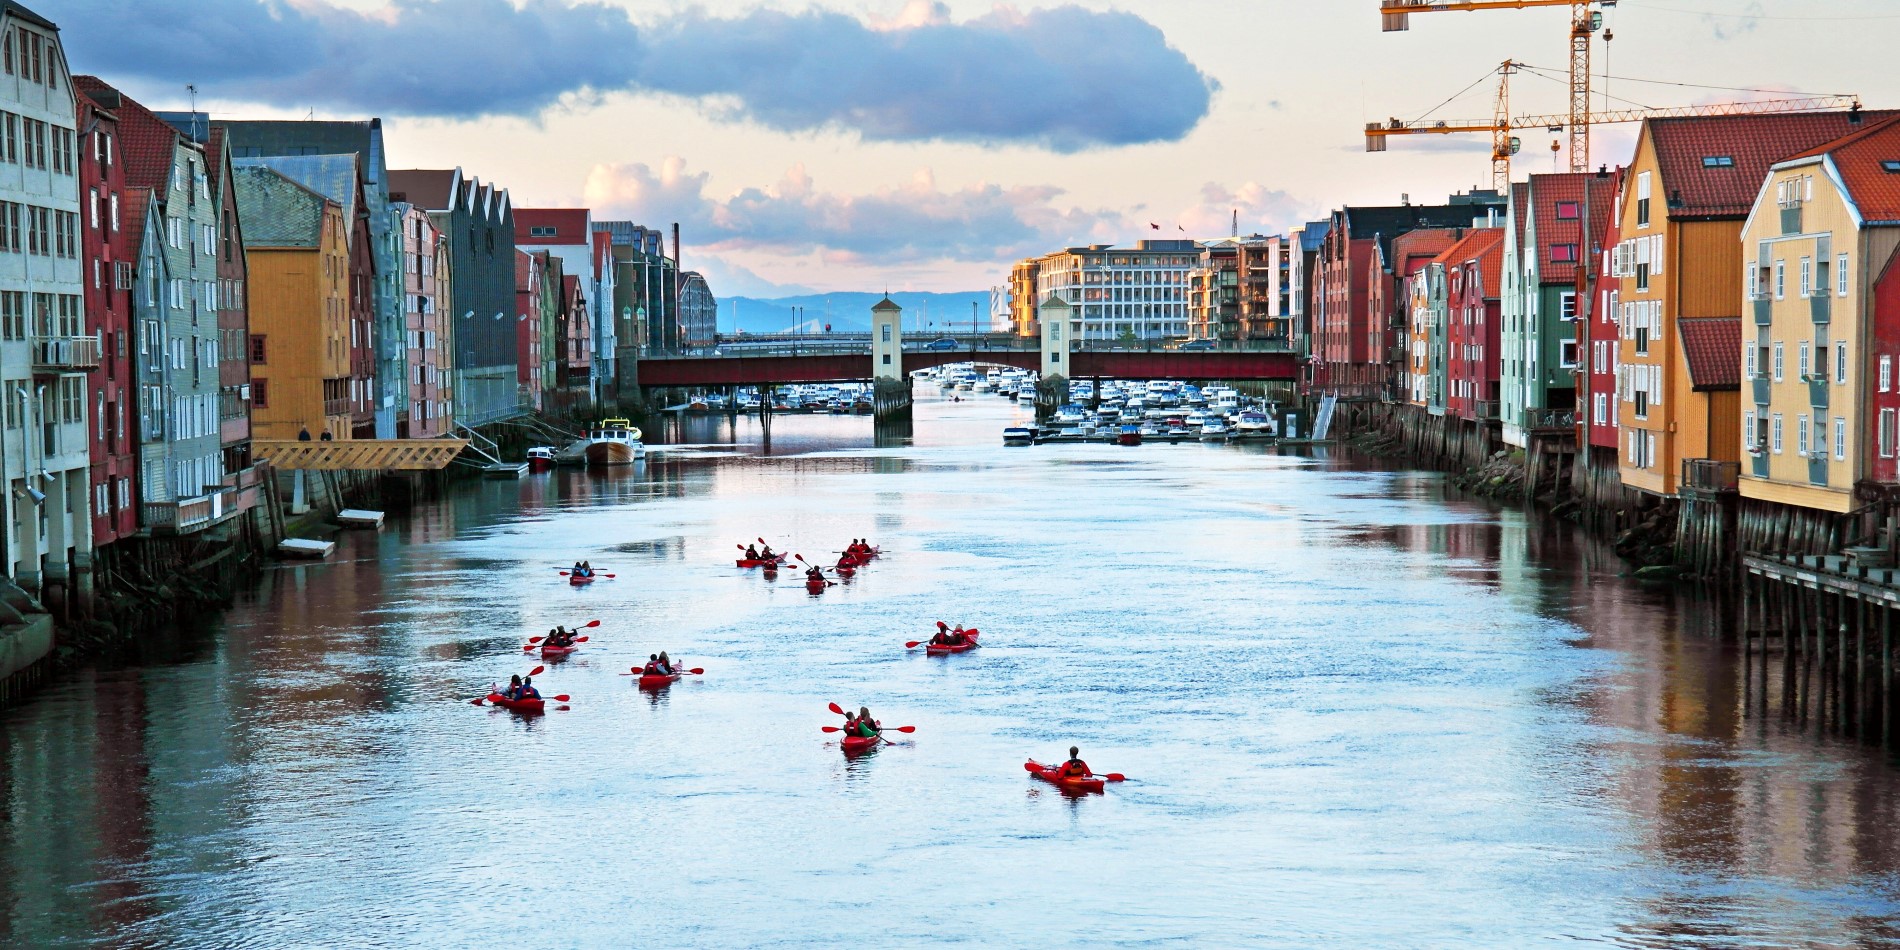 A group of kayaks paddling on the river Nid, in Trondheim, Norway